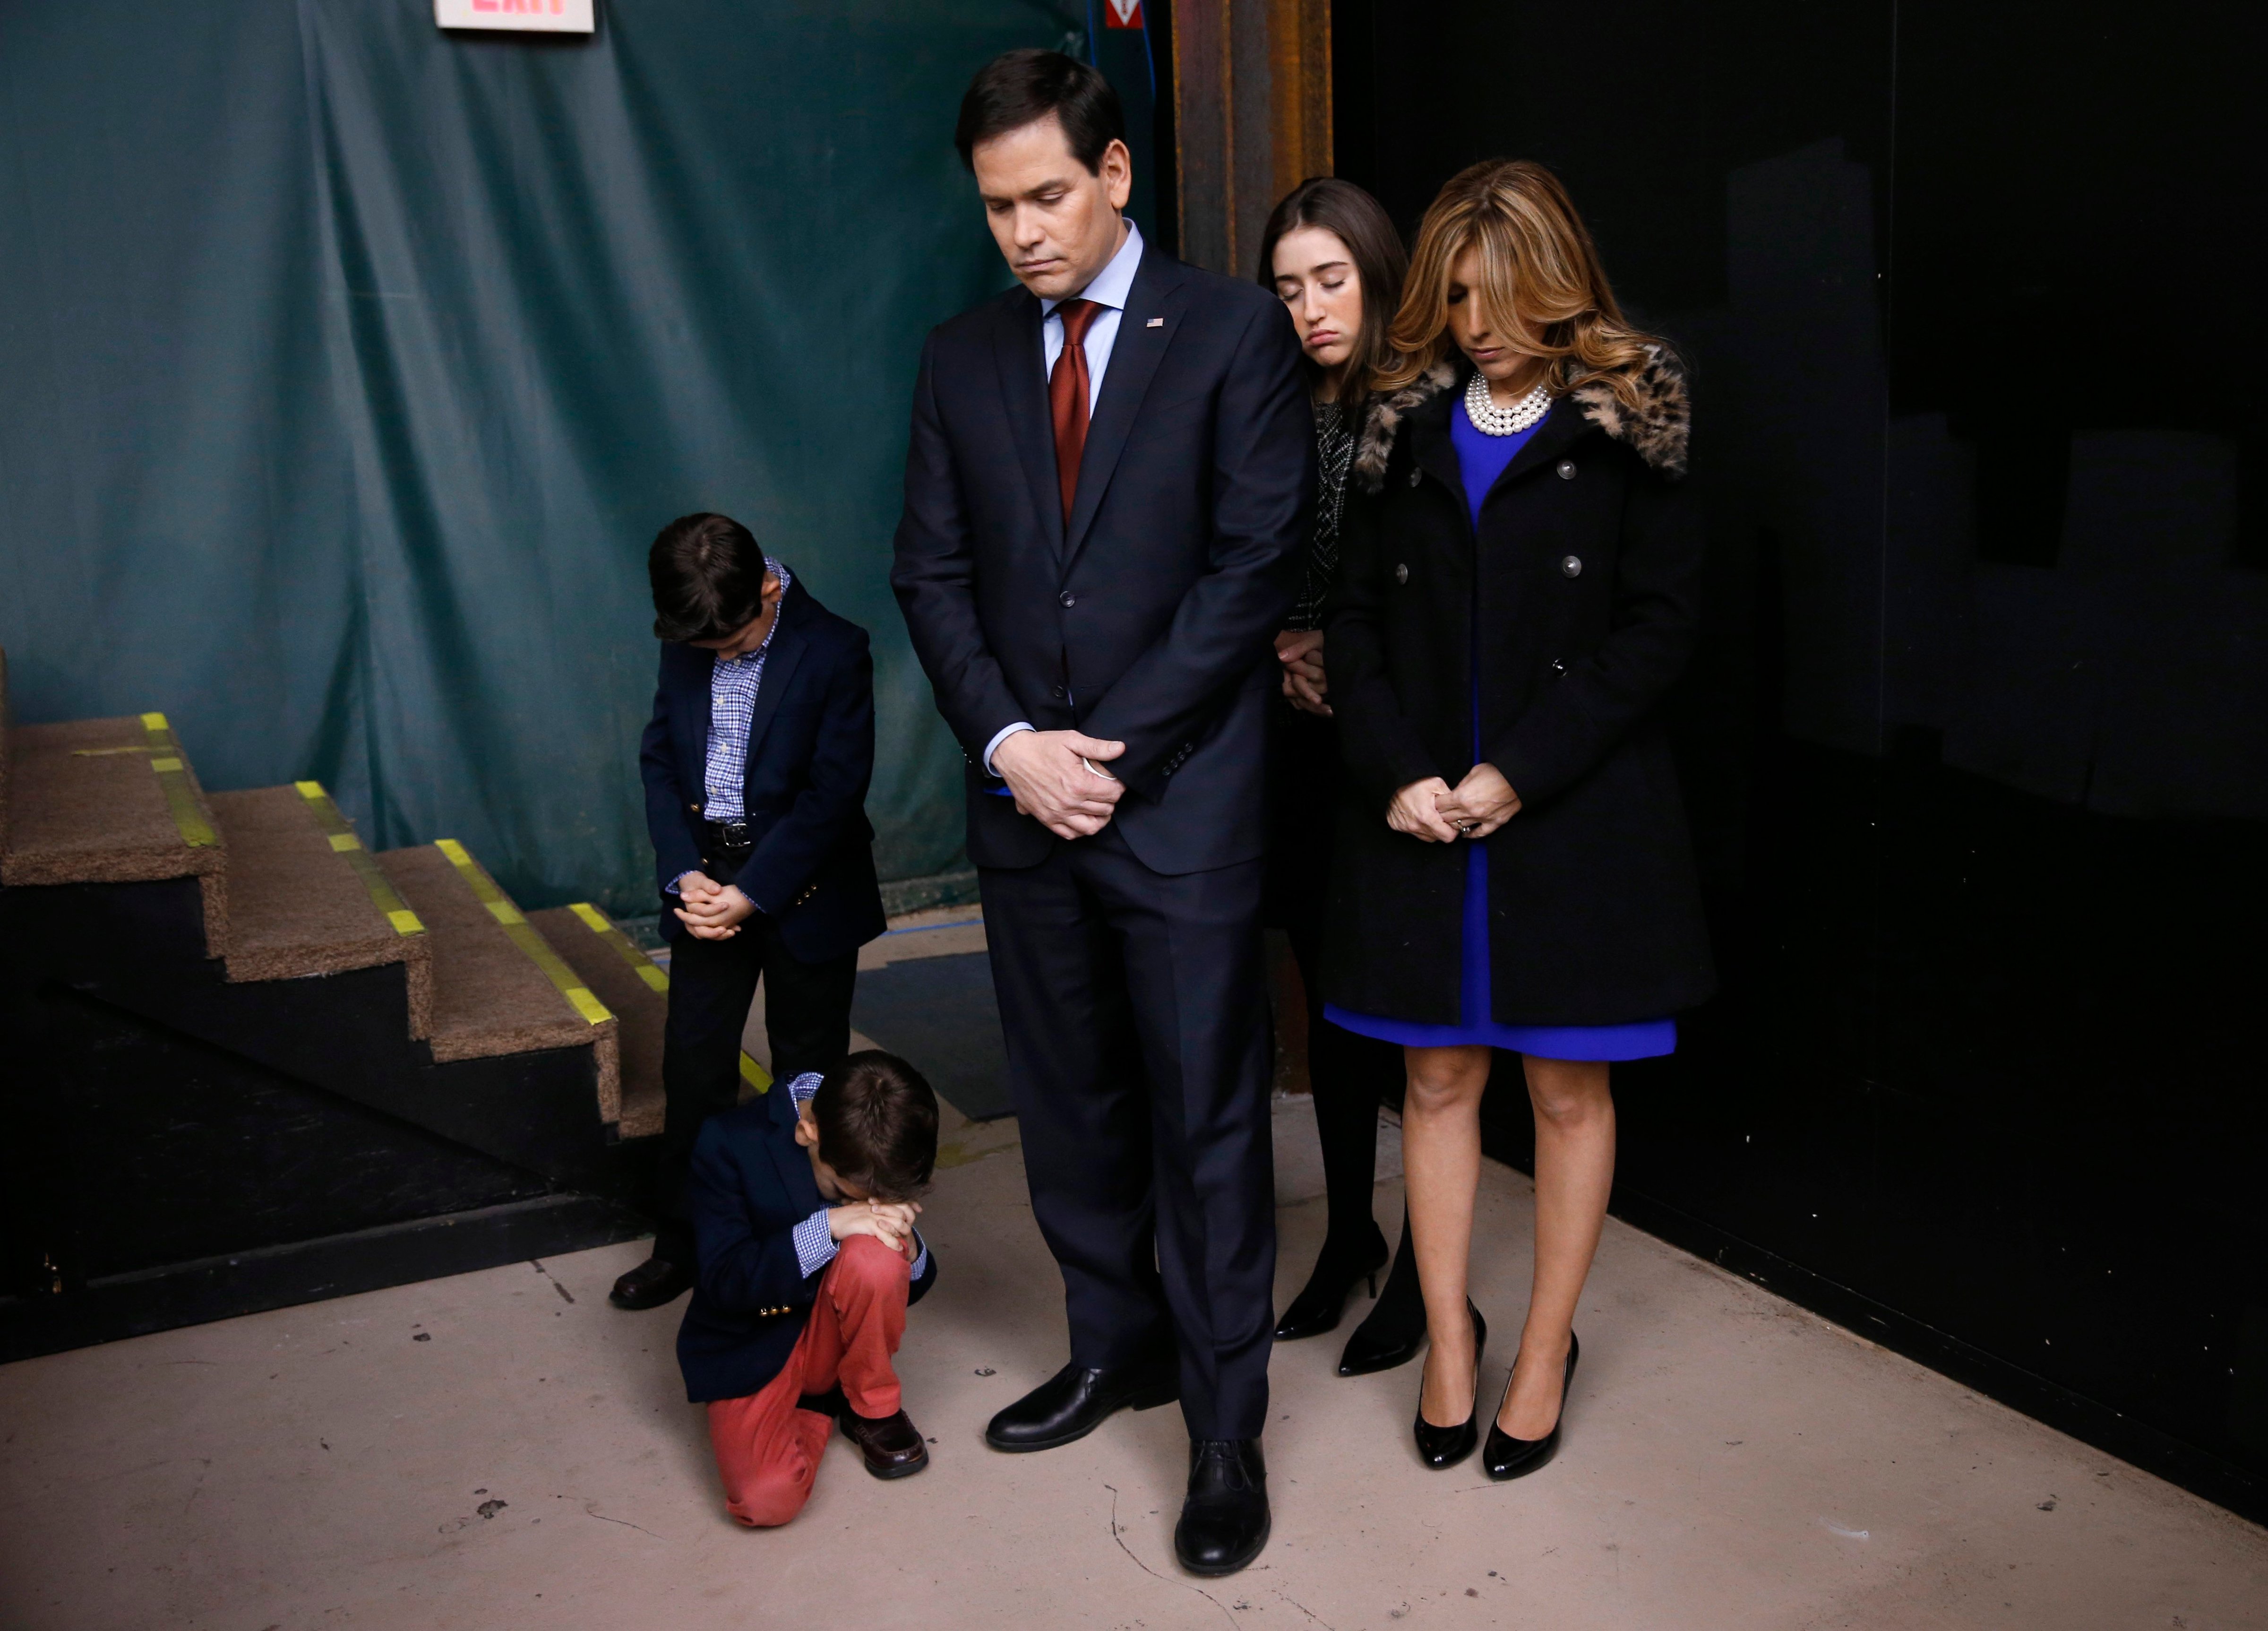 Republican presidential candidate Sen. Marco Rubio and his family pray during opening of a caucus site, Feb. 1, 2016 in Clive, Iowa. (Paul Sancya—AP)